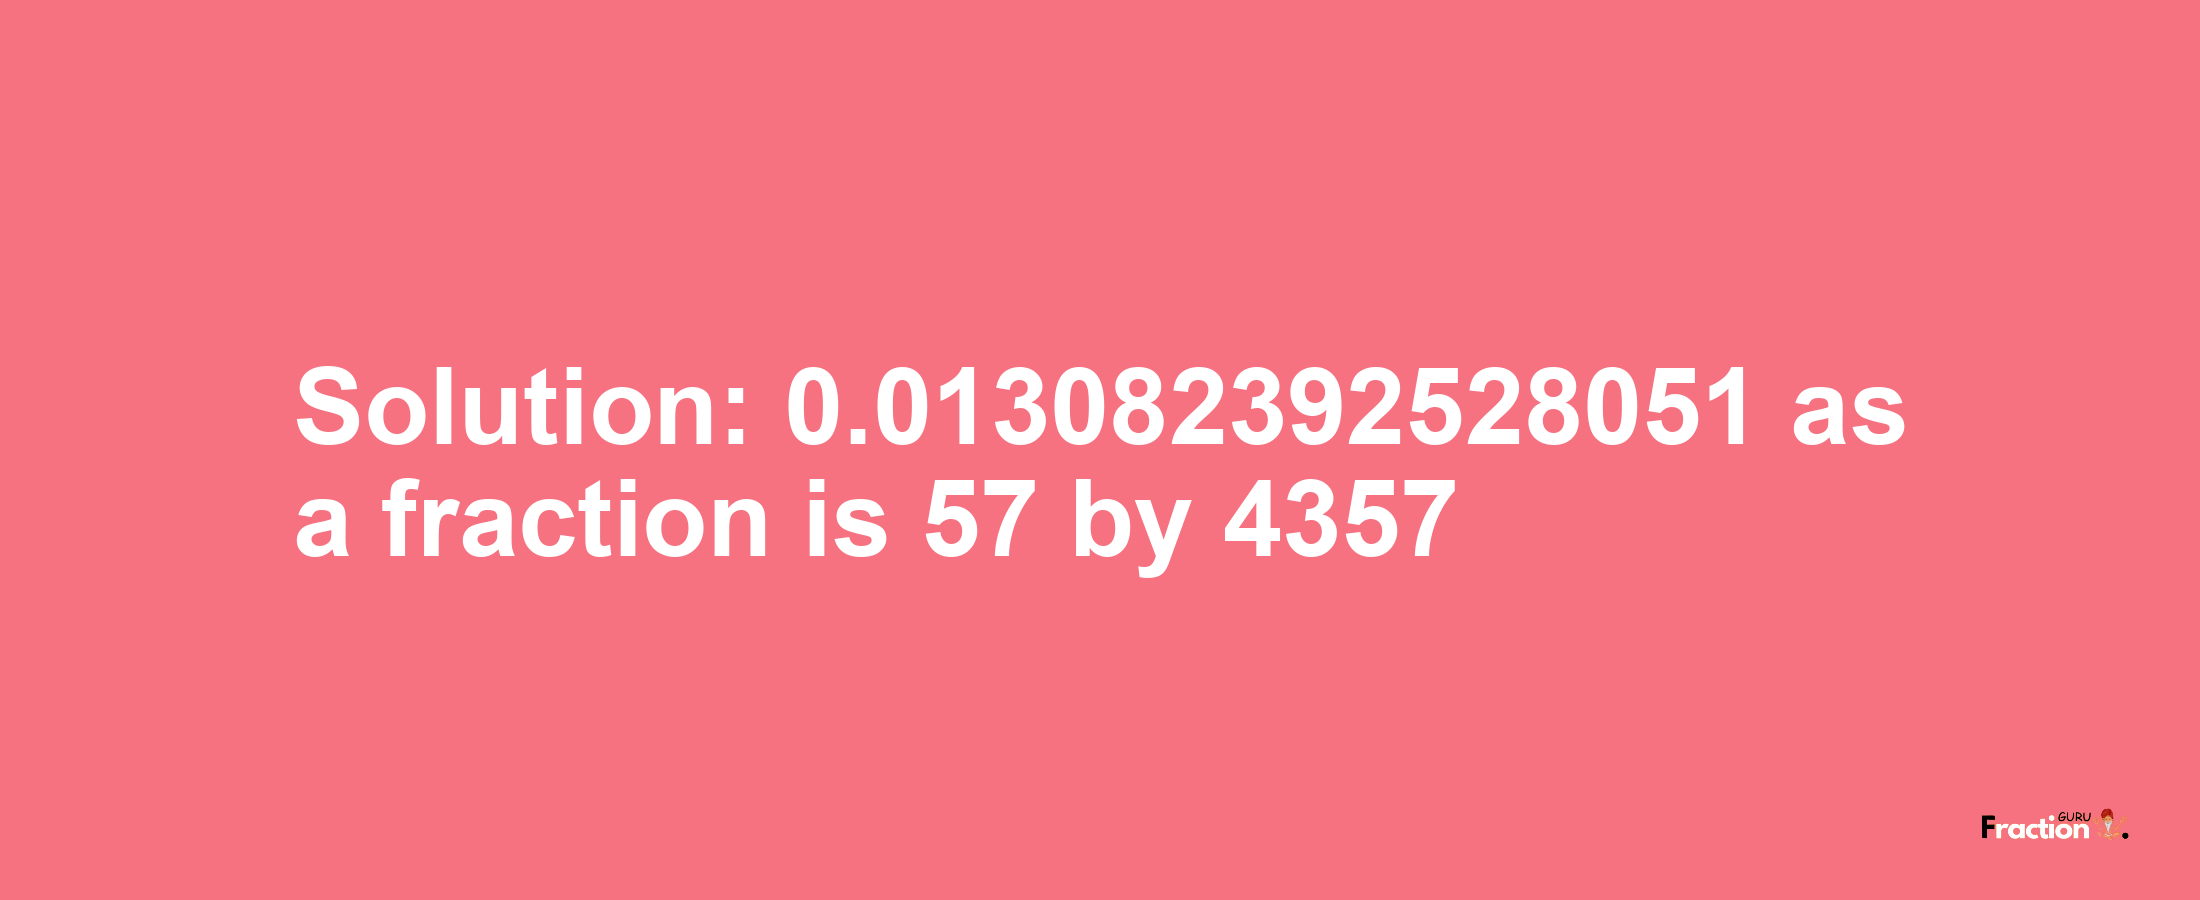 Solution:0.013082392528051 as a fraction is 57/4357